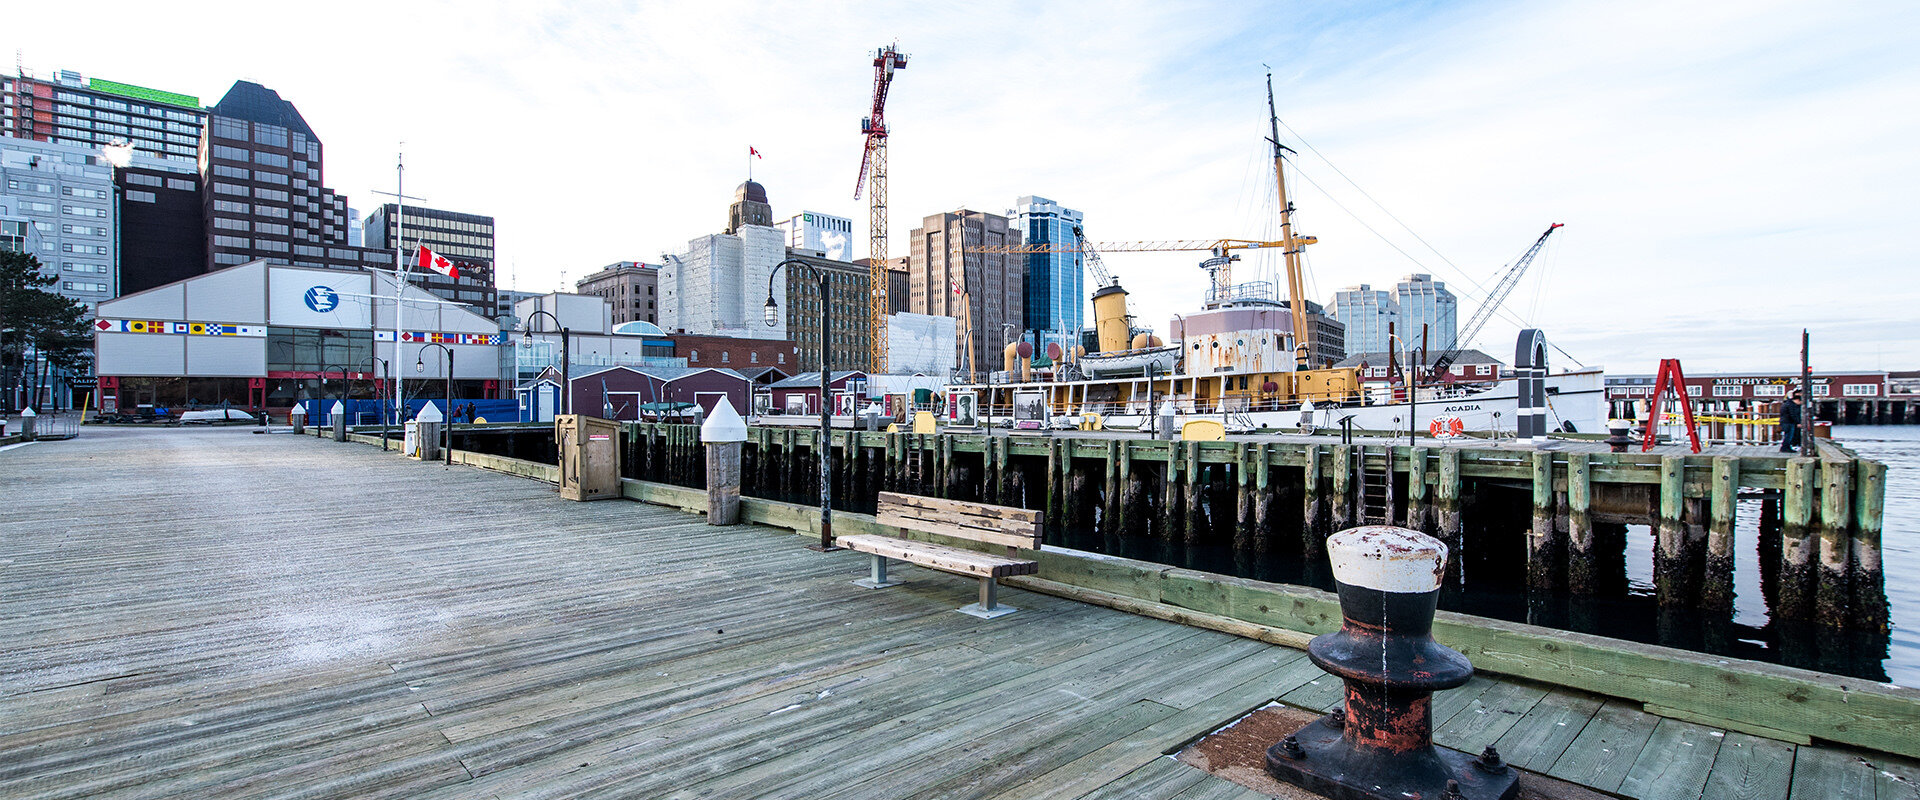 How to visit Halifax without a car 